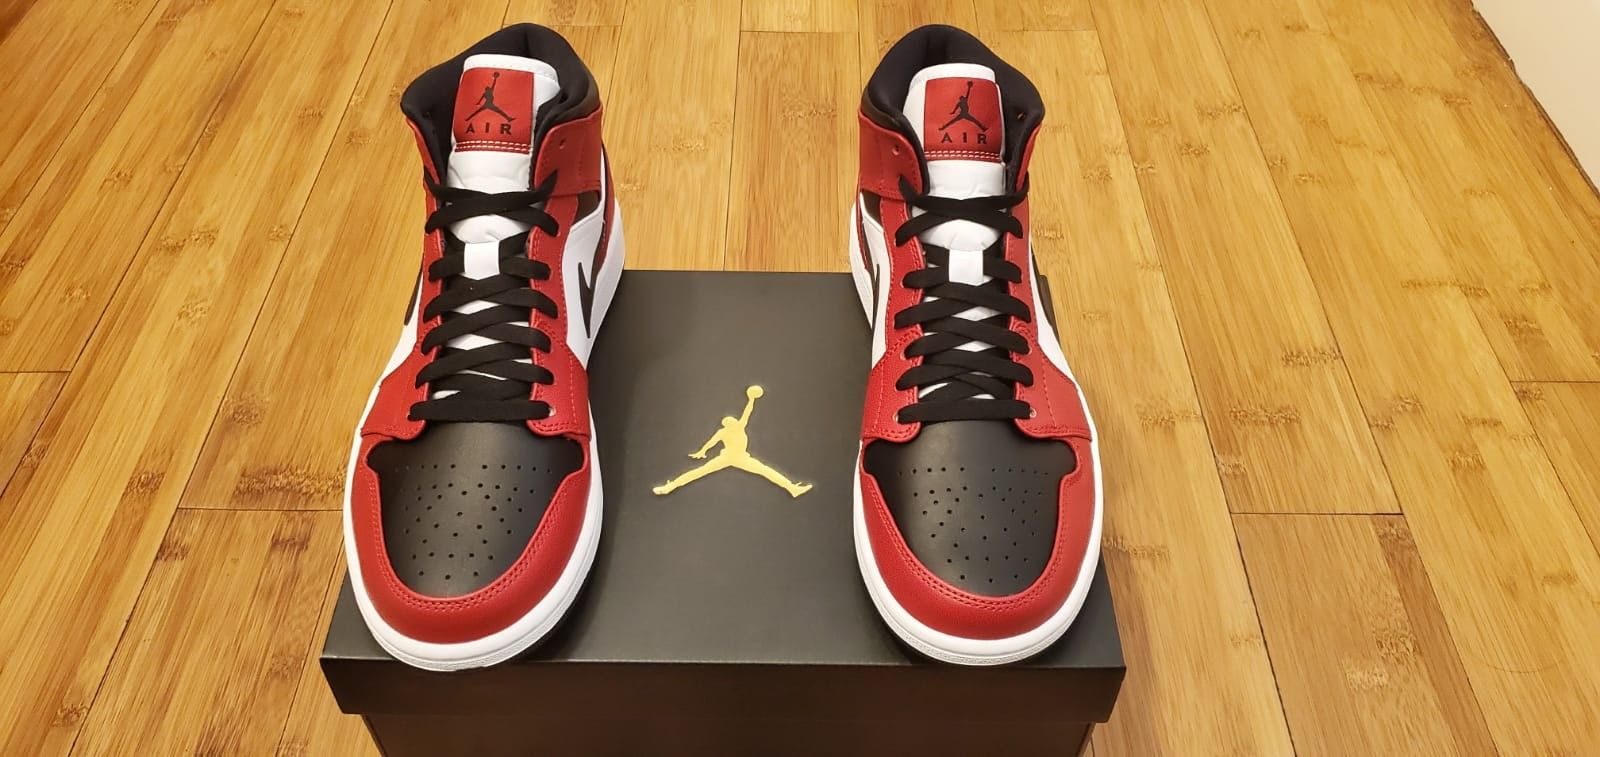 Jordan 1's size 8.5,9.5 and 10.5 for Men